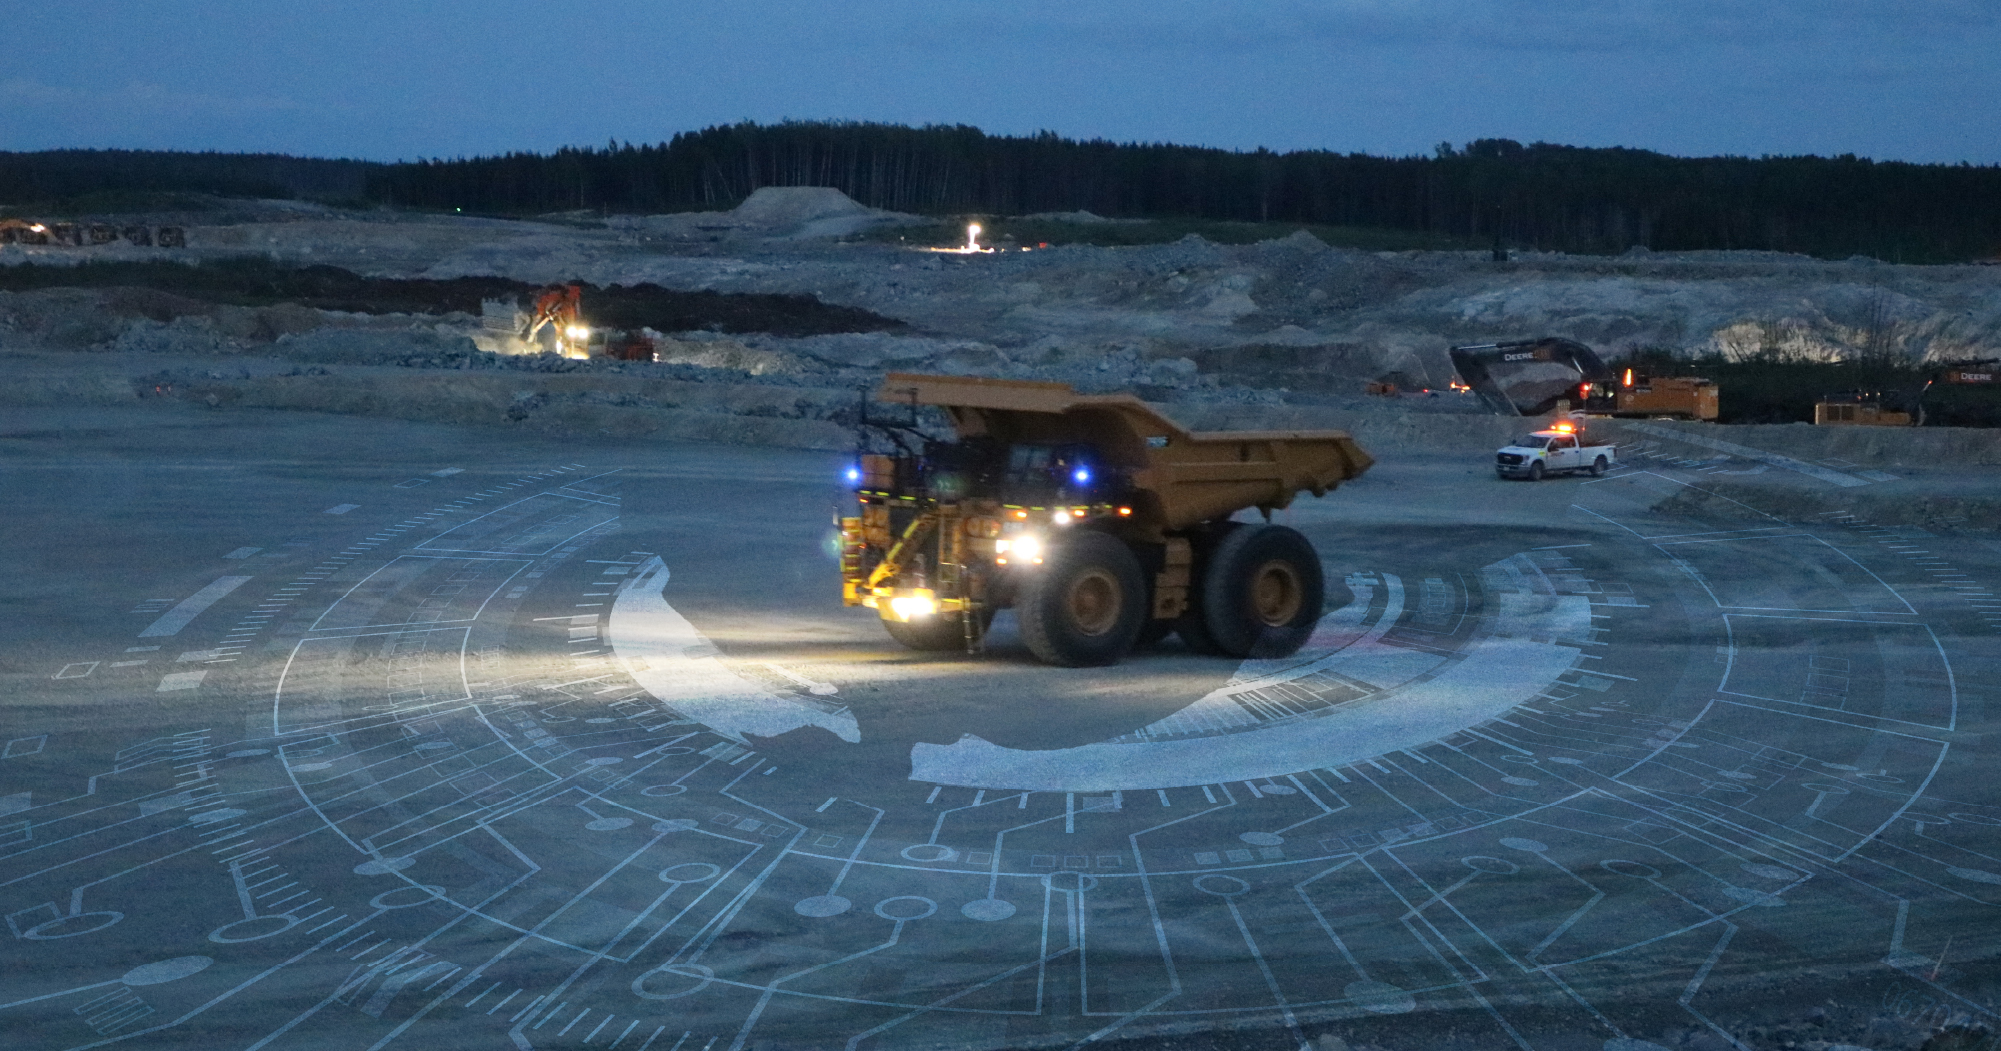 Autonomous truck in action at the mine